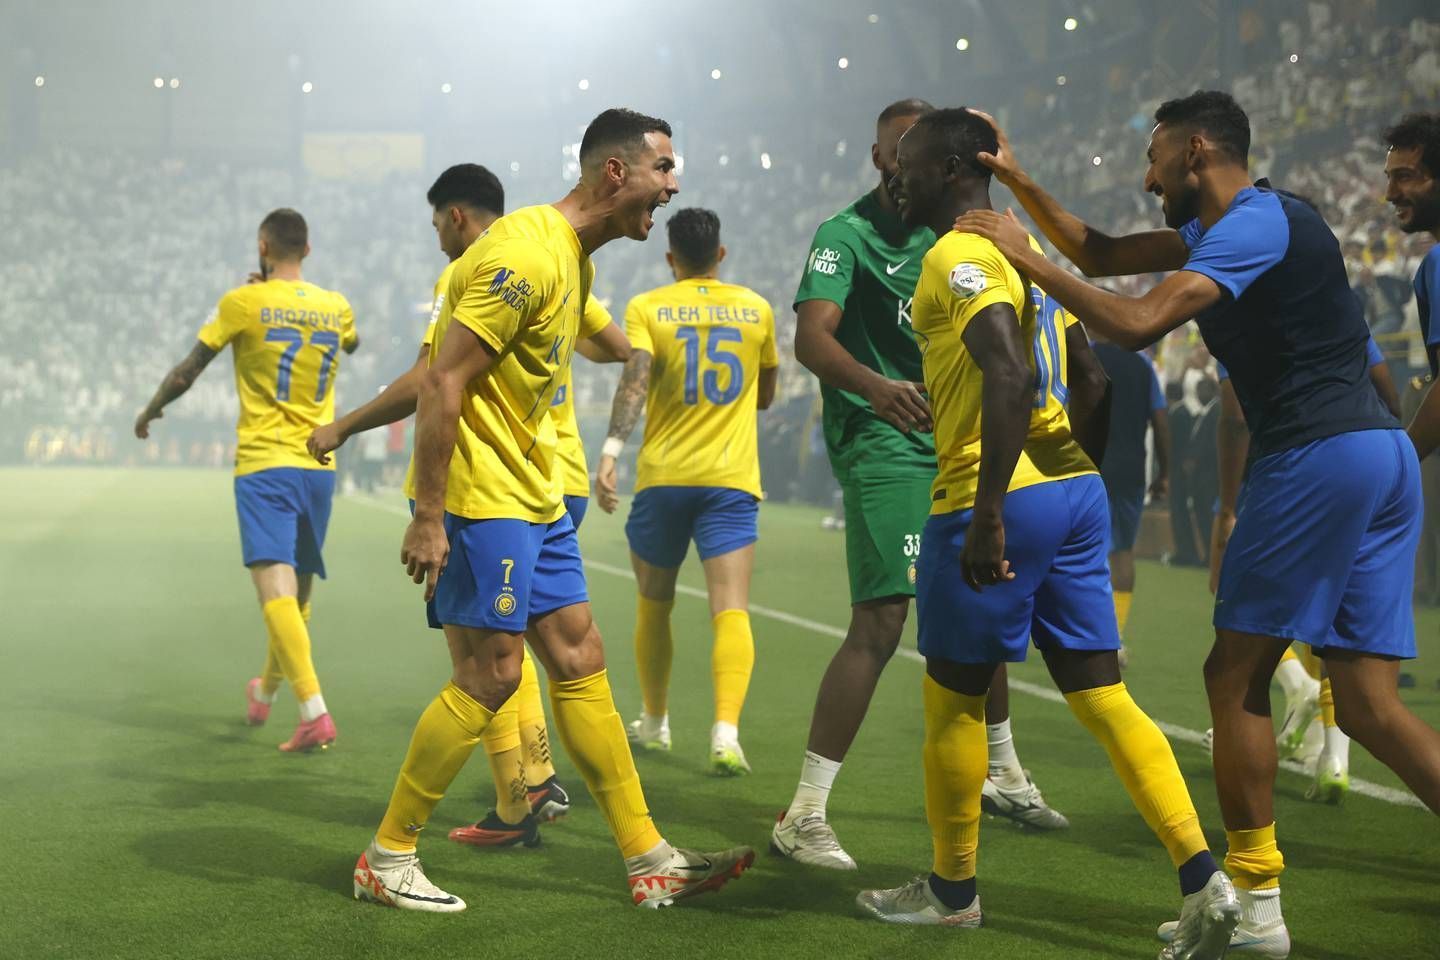 Ohod and Al-Nassr meet for the first time since January 2019 